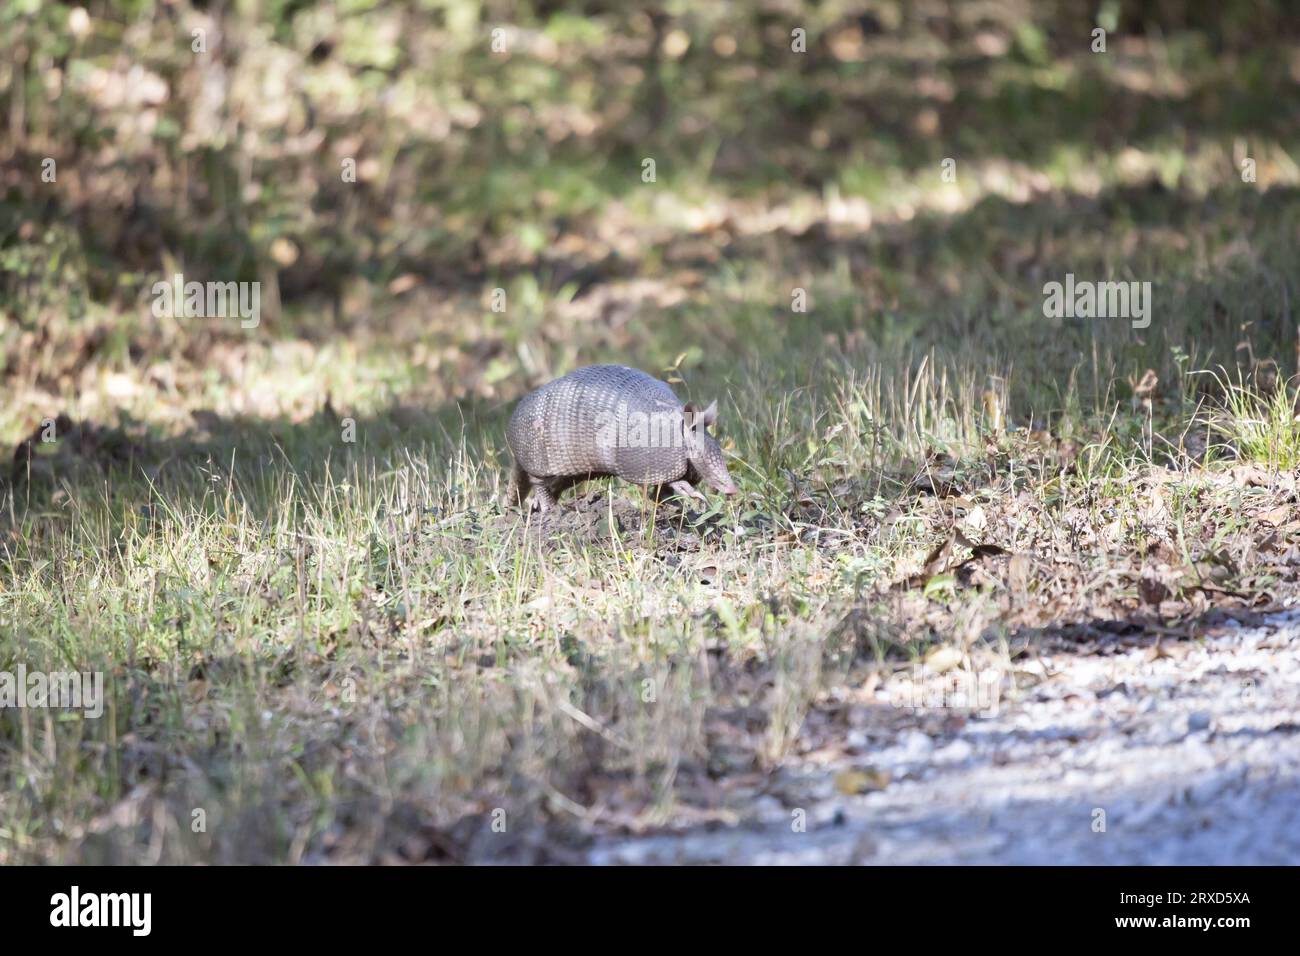 Nine-banded armadillo (Dasypus novemcinctus) hopping over an ant hill, as both its right front and hind feet are visible Stock Photo